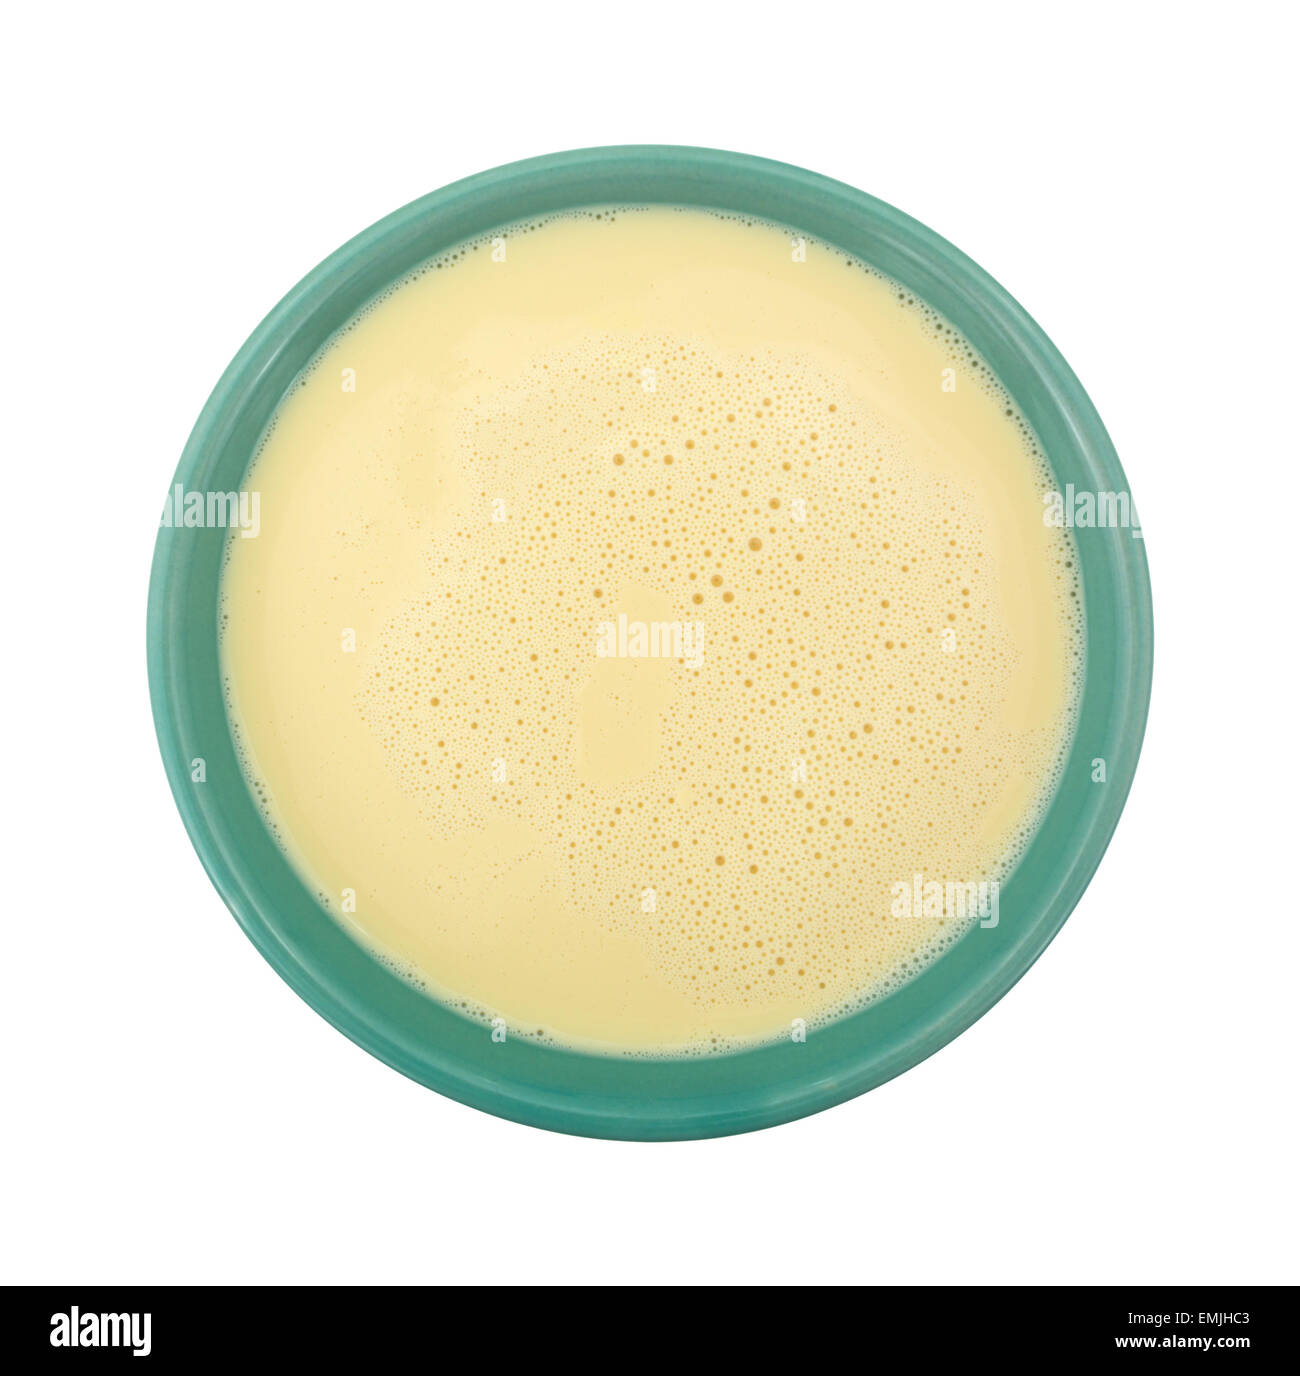 Top view of a bowl filled with evaporated milk on a white background. Stock Photo